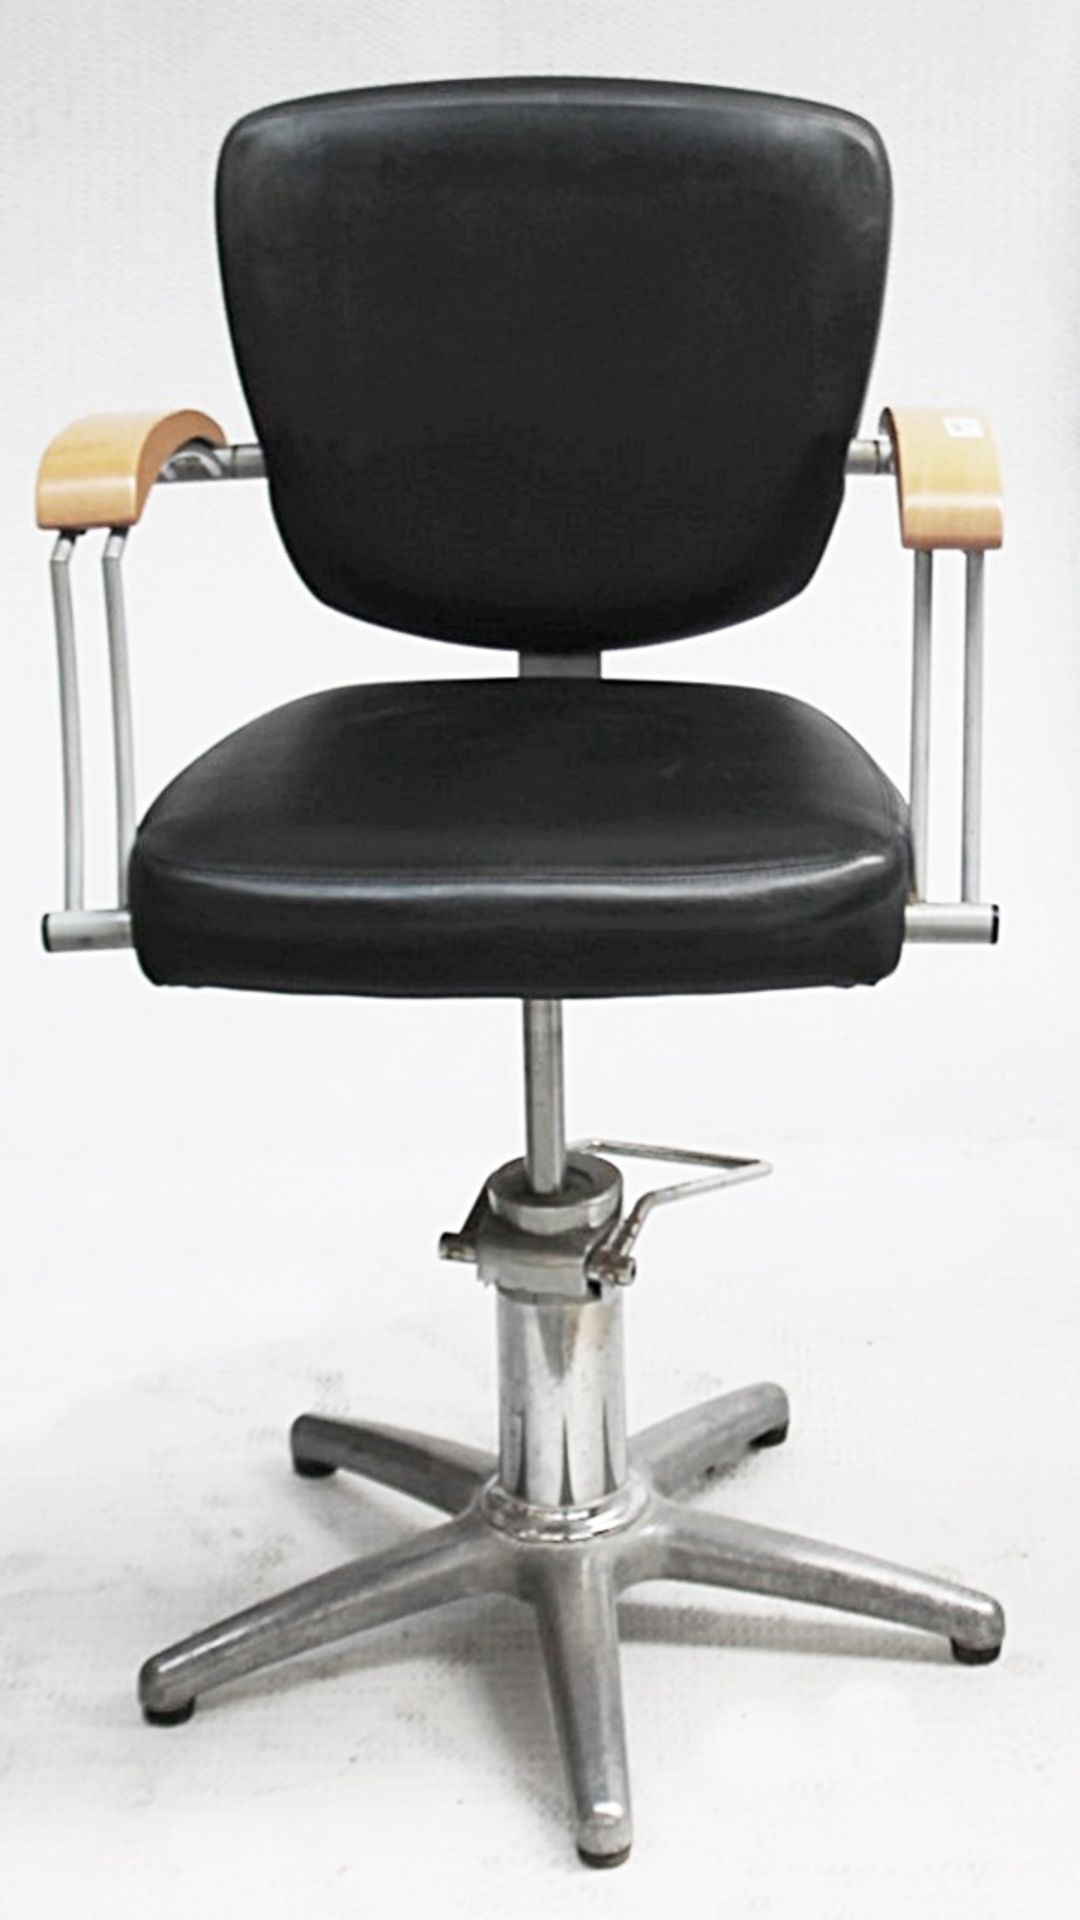 1 x Adjustable Black Hydraulic Barber Hairdressing Chair - Recently Removed From A Boutique Hair - Image 7 of 11